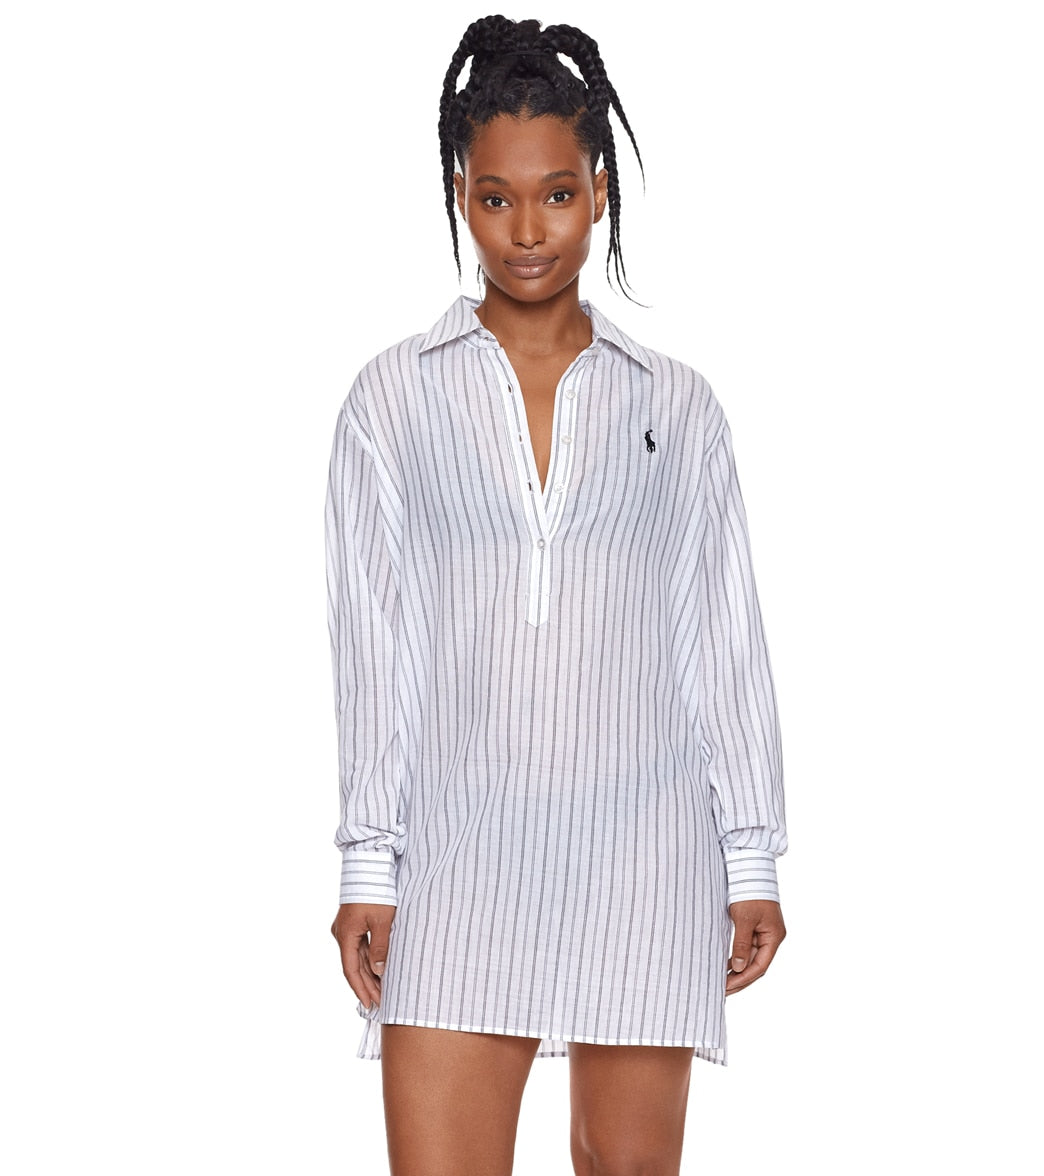 Tunic Shirt - White on White Check Women's Popover Blouse by